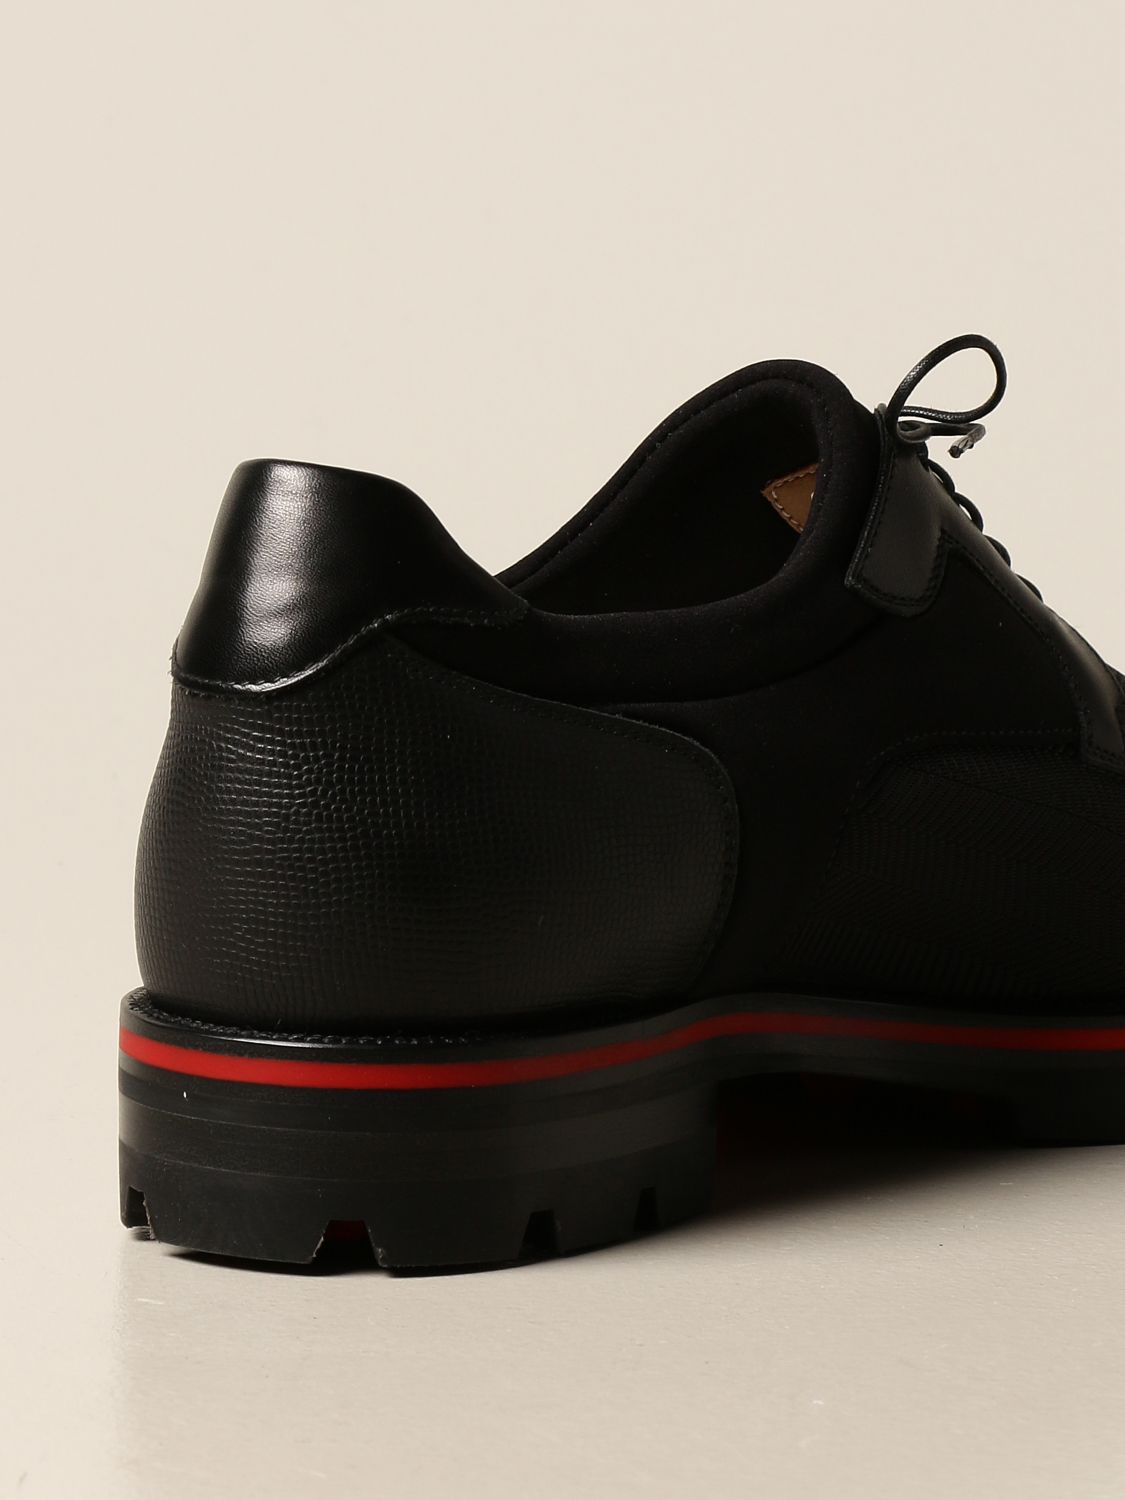 Christian Louboutin Outlet: Simon shoe in leather and fabric - Black | Louboutin brogue shoes 3201112 at GIGLIO.COM